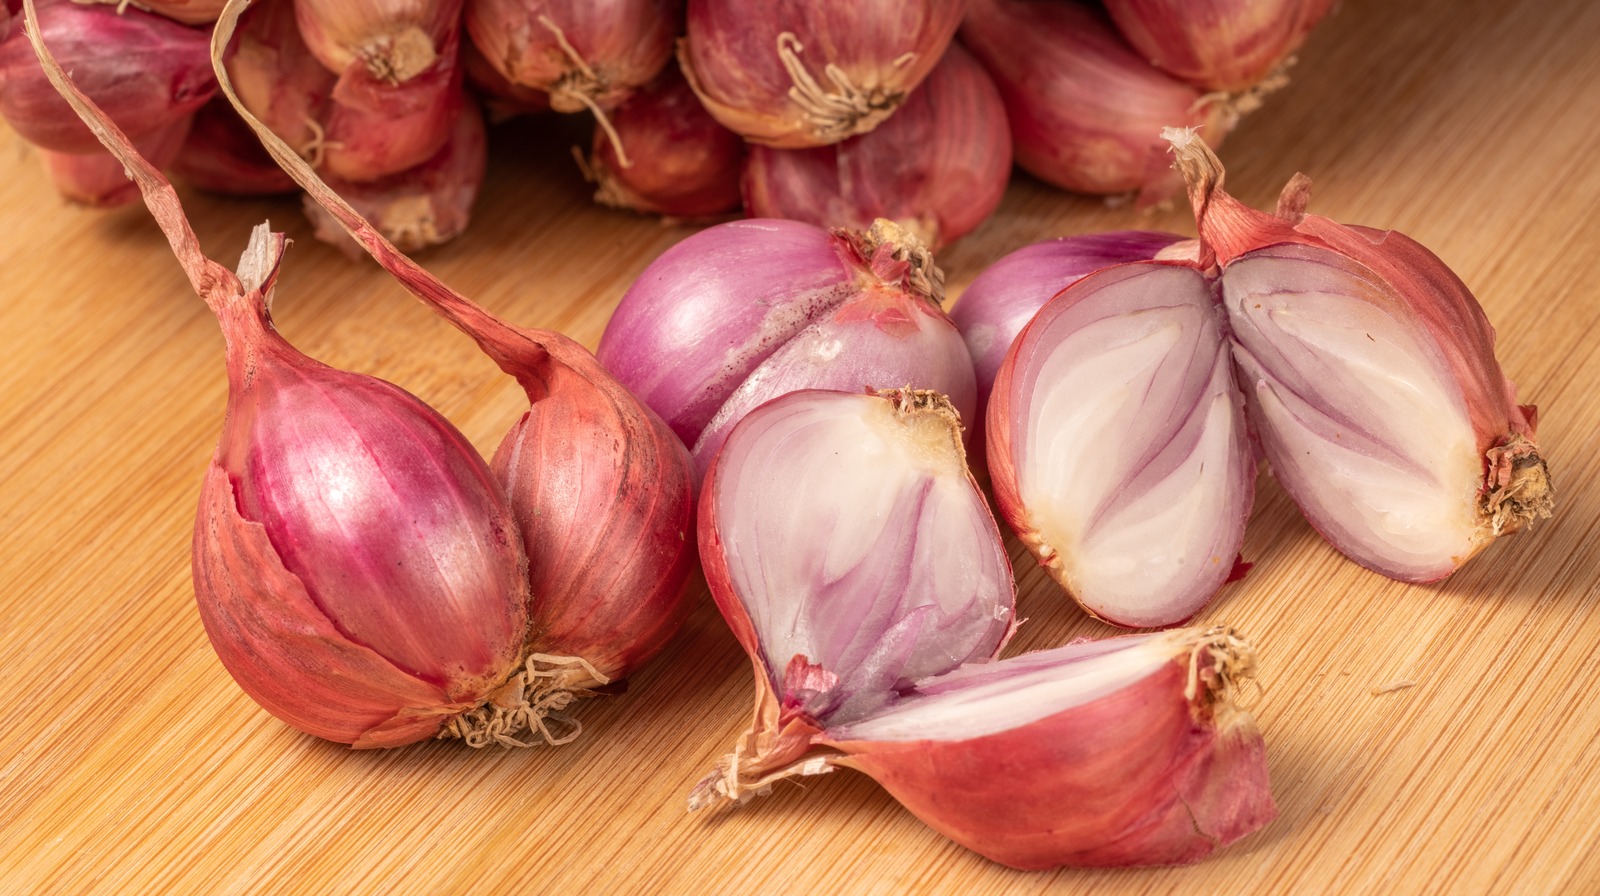 Shallot Substitutes - What to use When you Don't Have Time To Shop?